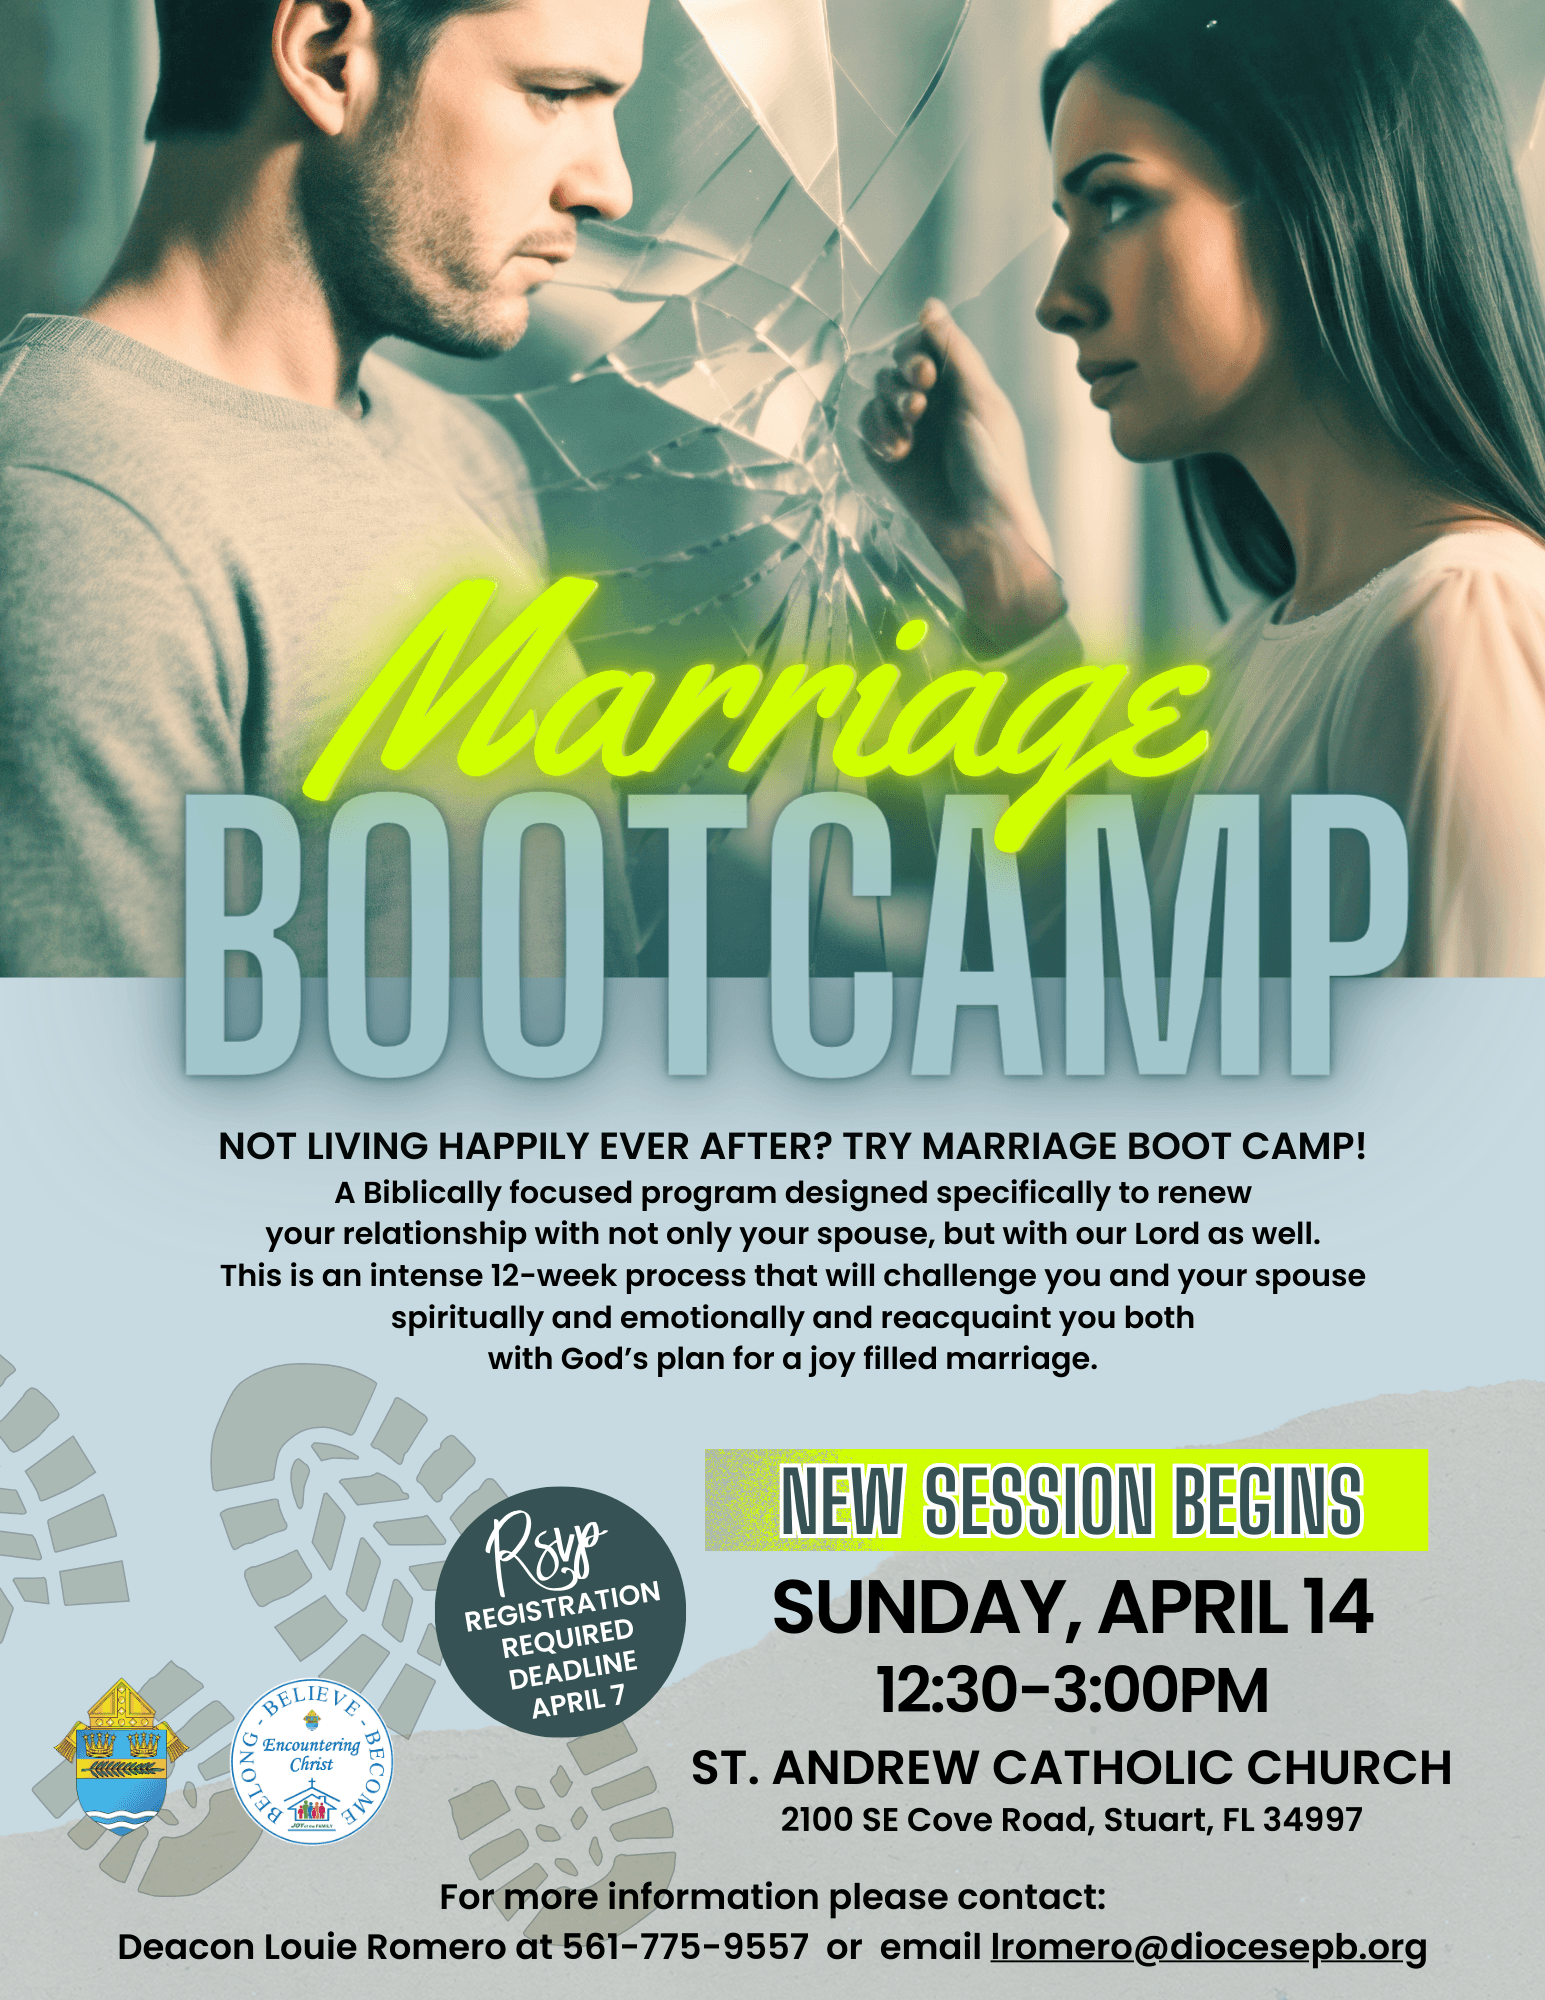 Marriage Bootcamp